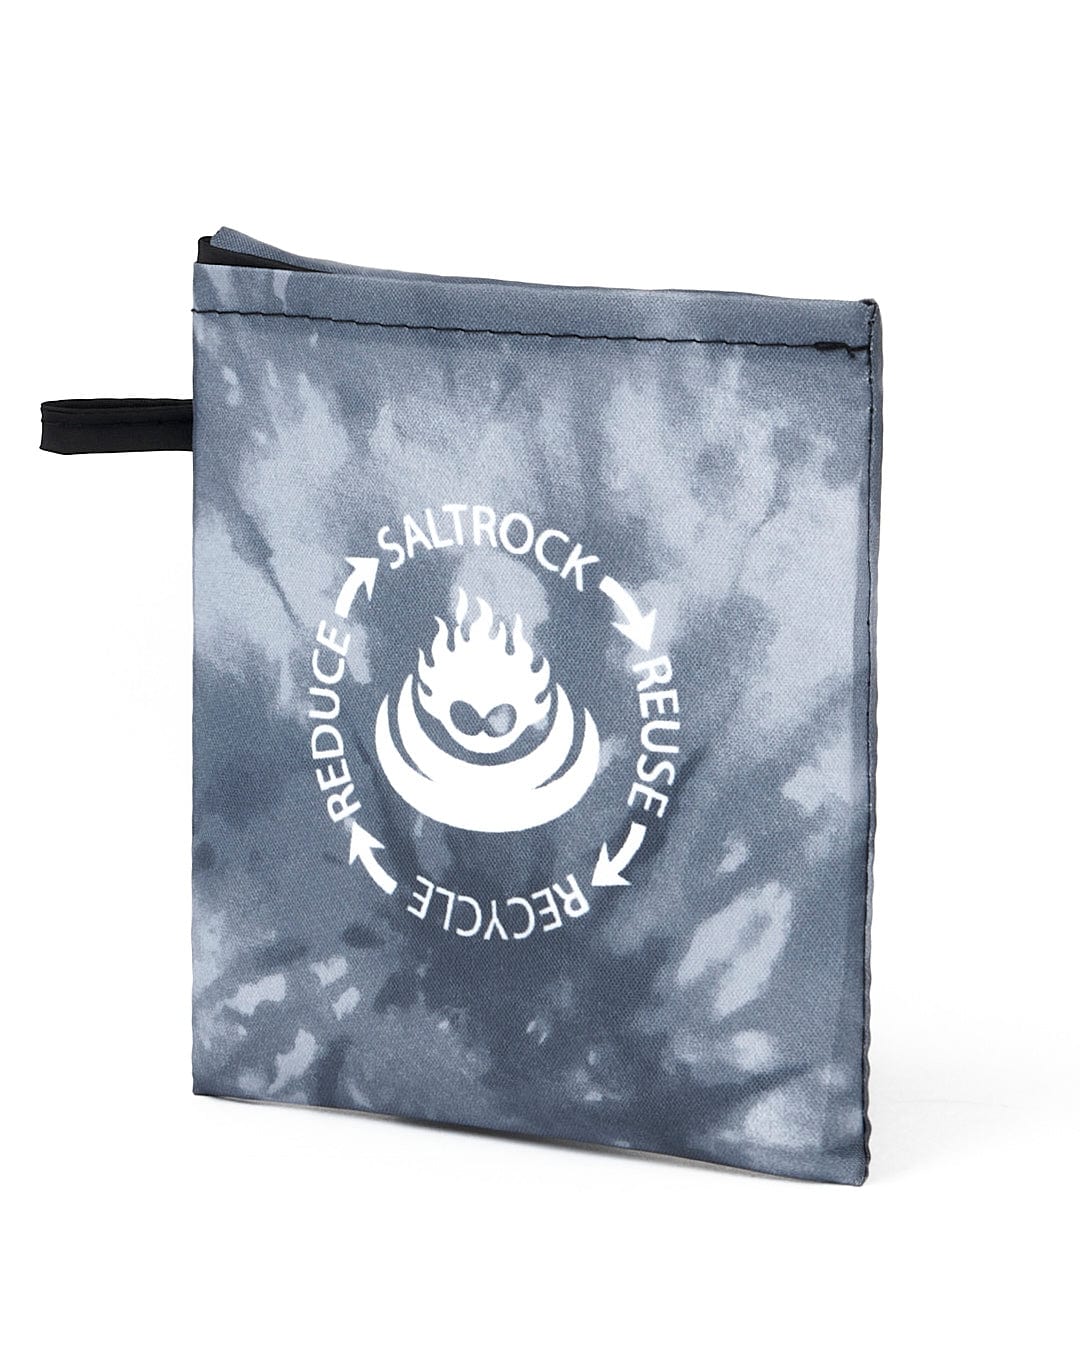 A sustainable, reusable Salvage - Recycled Shopper Bag - Dark Grey featuring the logo of a Saltrock rock and roll club.